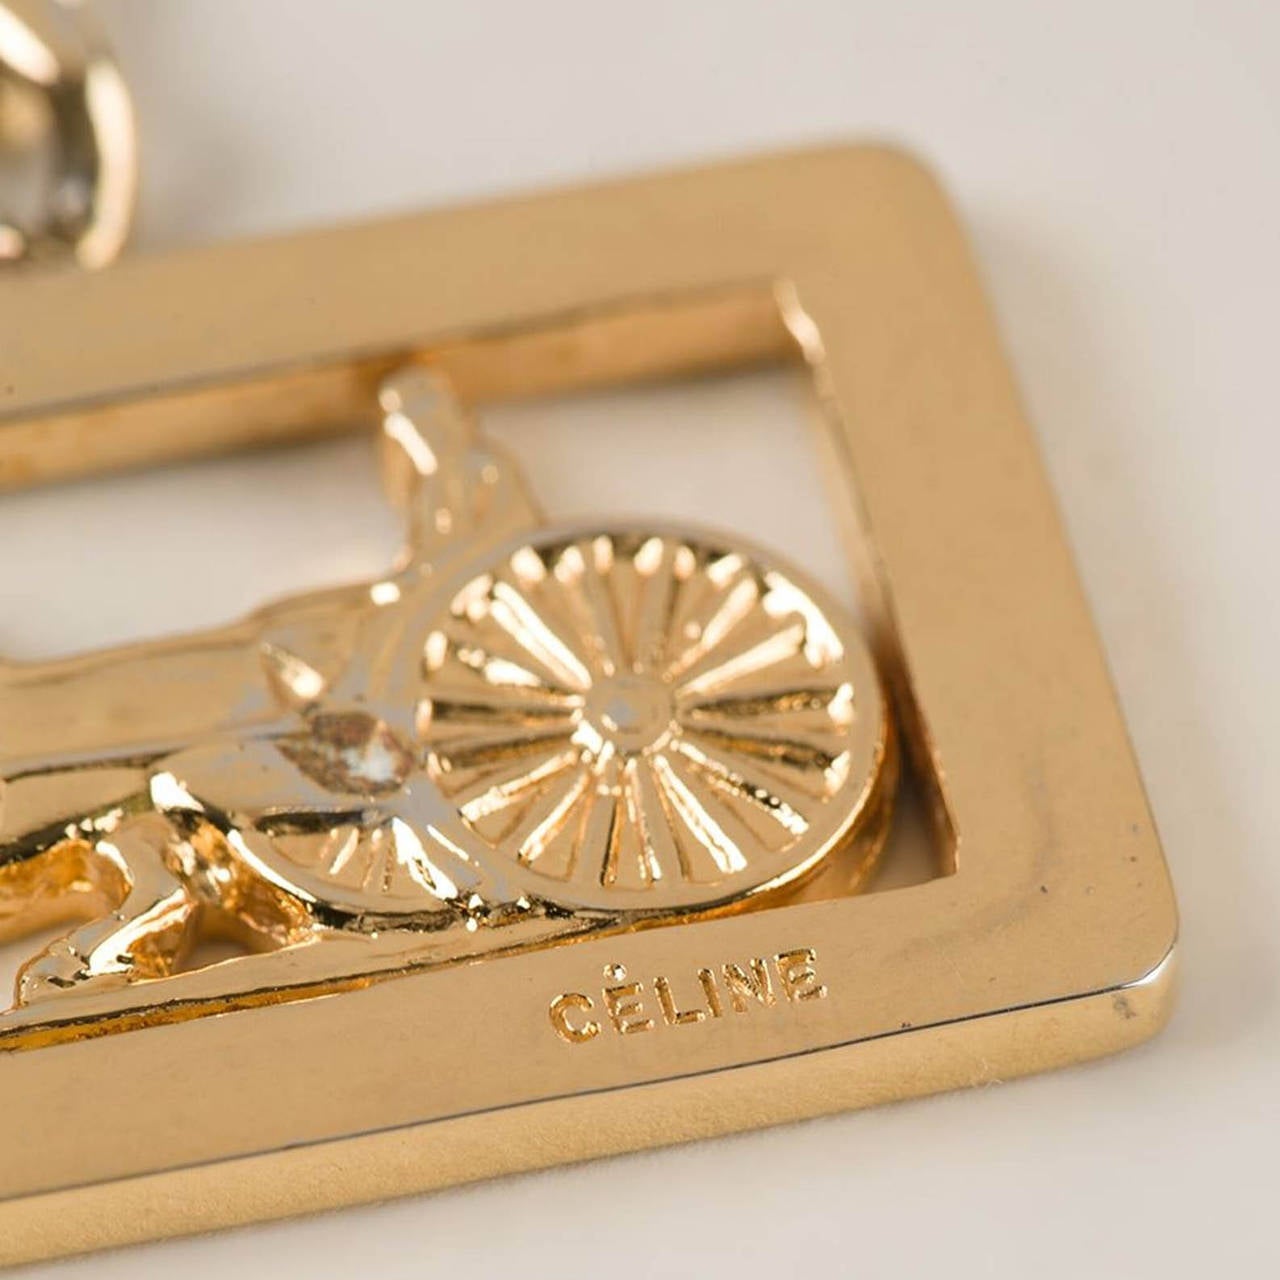 This vintage Gold-tone keychain from Céline features the brands signiture Horse and carriage logo on a chain.

Measurements: Width: 4cm, Length: 10cm

Material: Gold-tone Metal

Colour: Gold